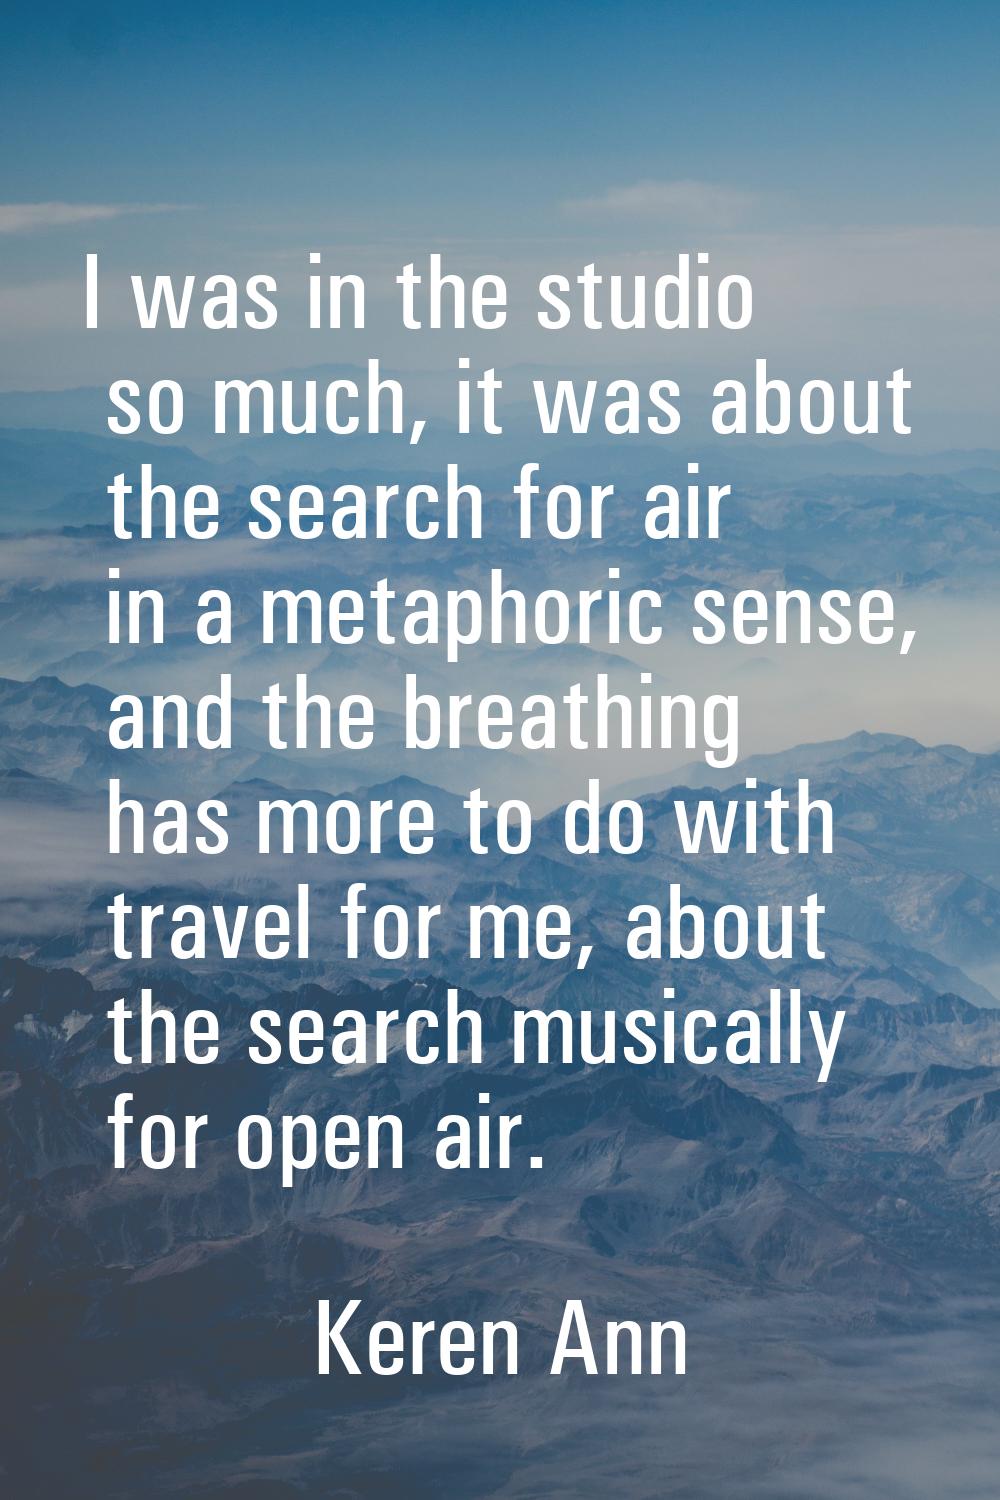 I was in the studio so much, it was about the search for air in a metaphoric sense, and the breathi